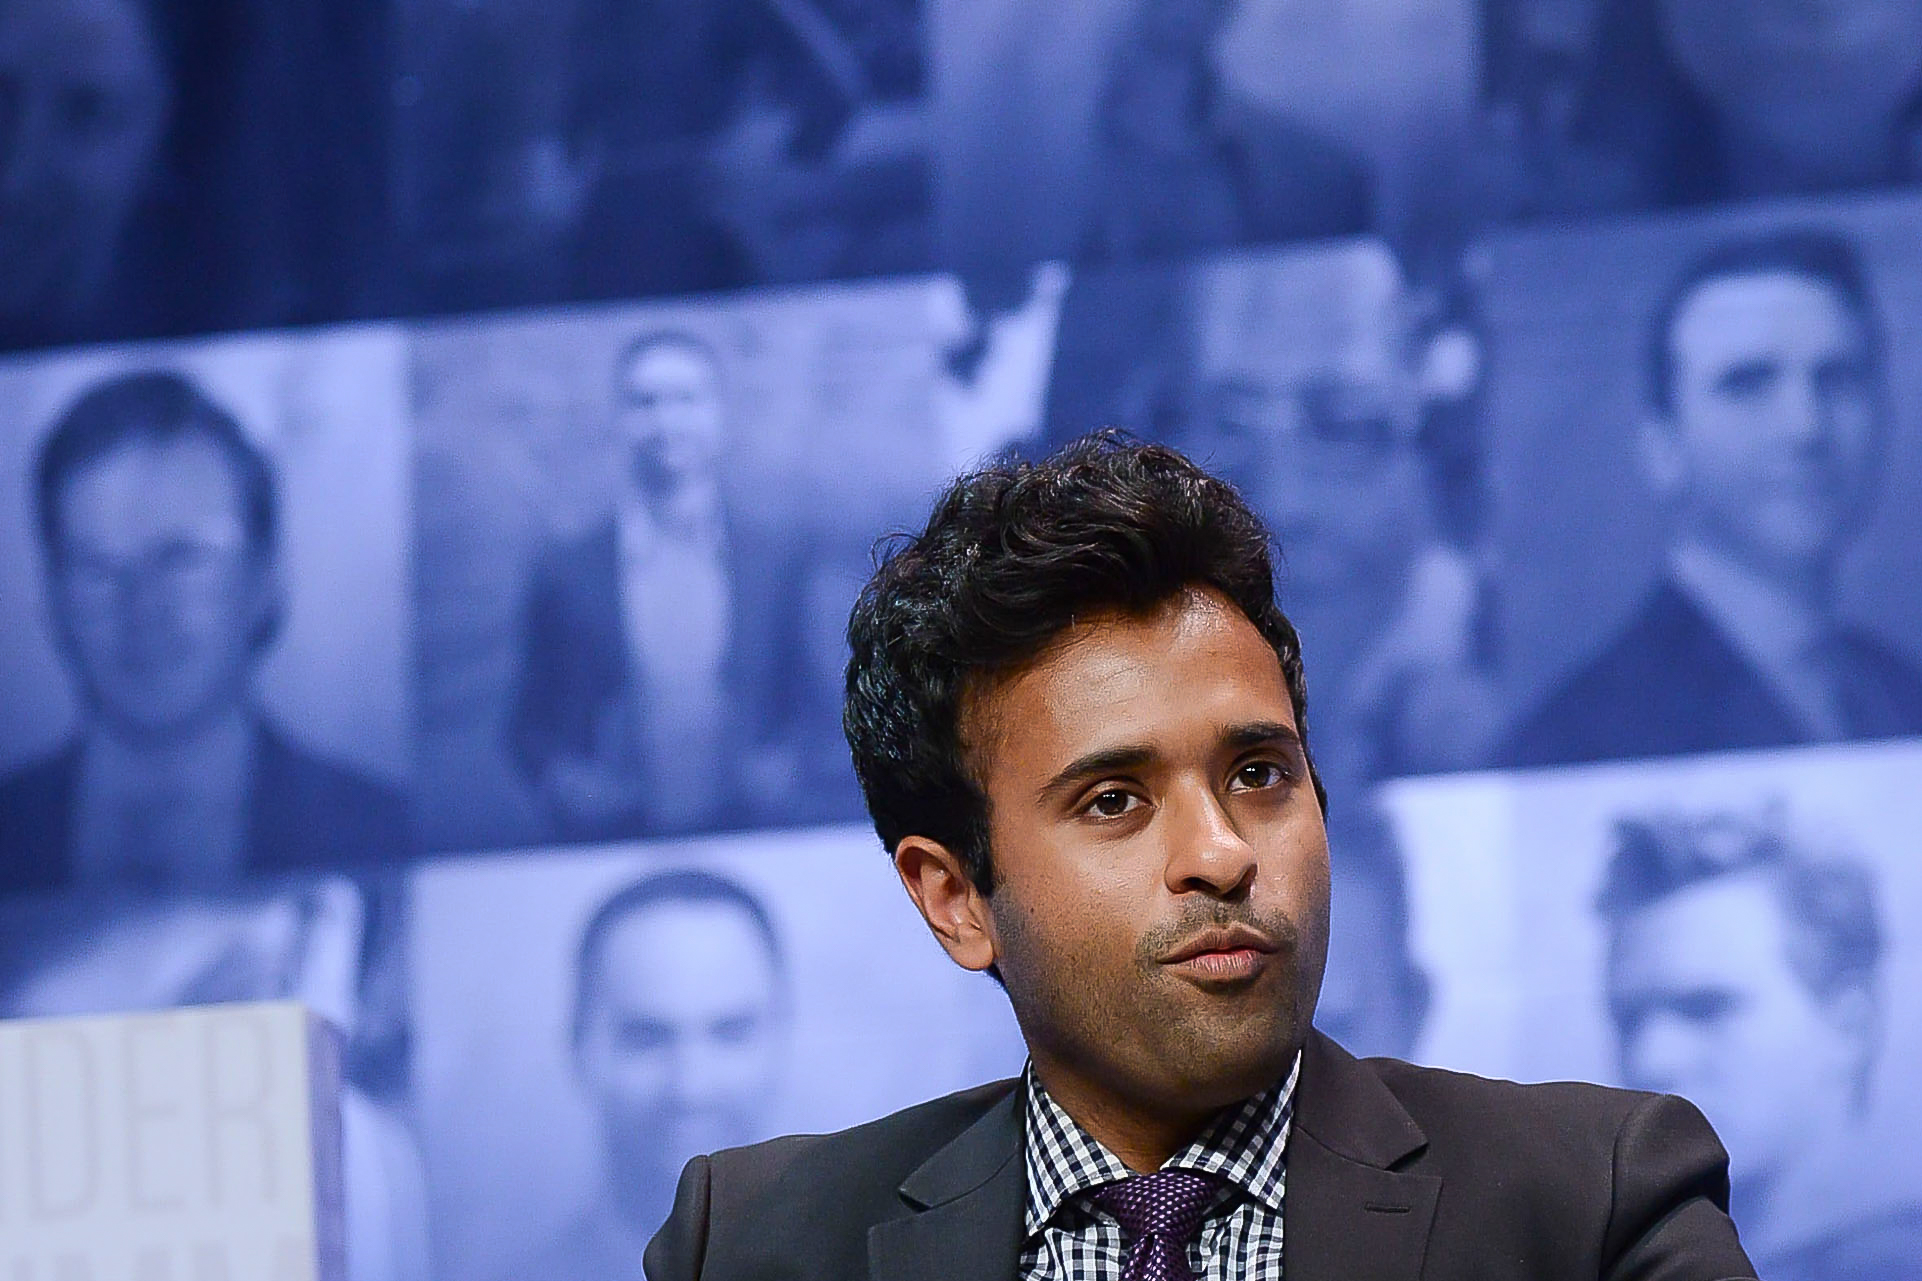 How Vivek Ramaswamy made a fortune before pivoting to politics - POLITICO